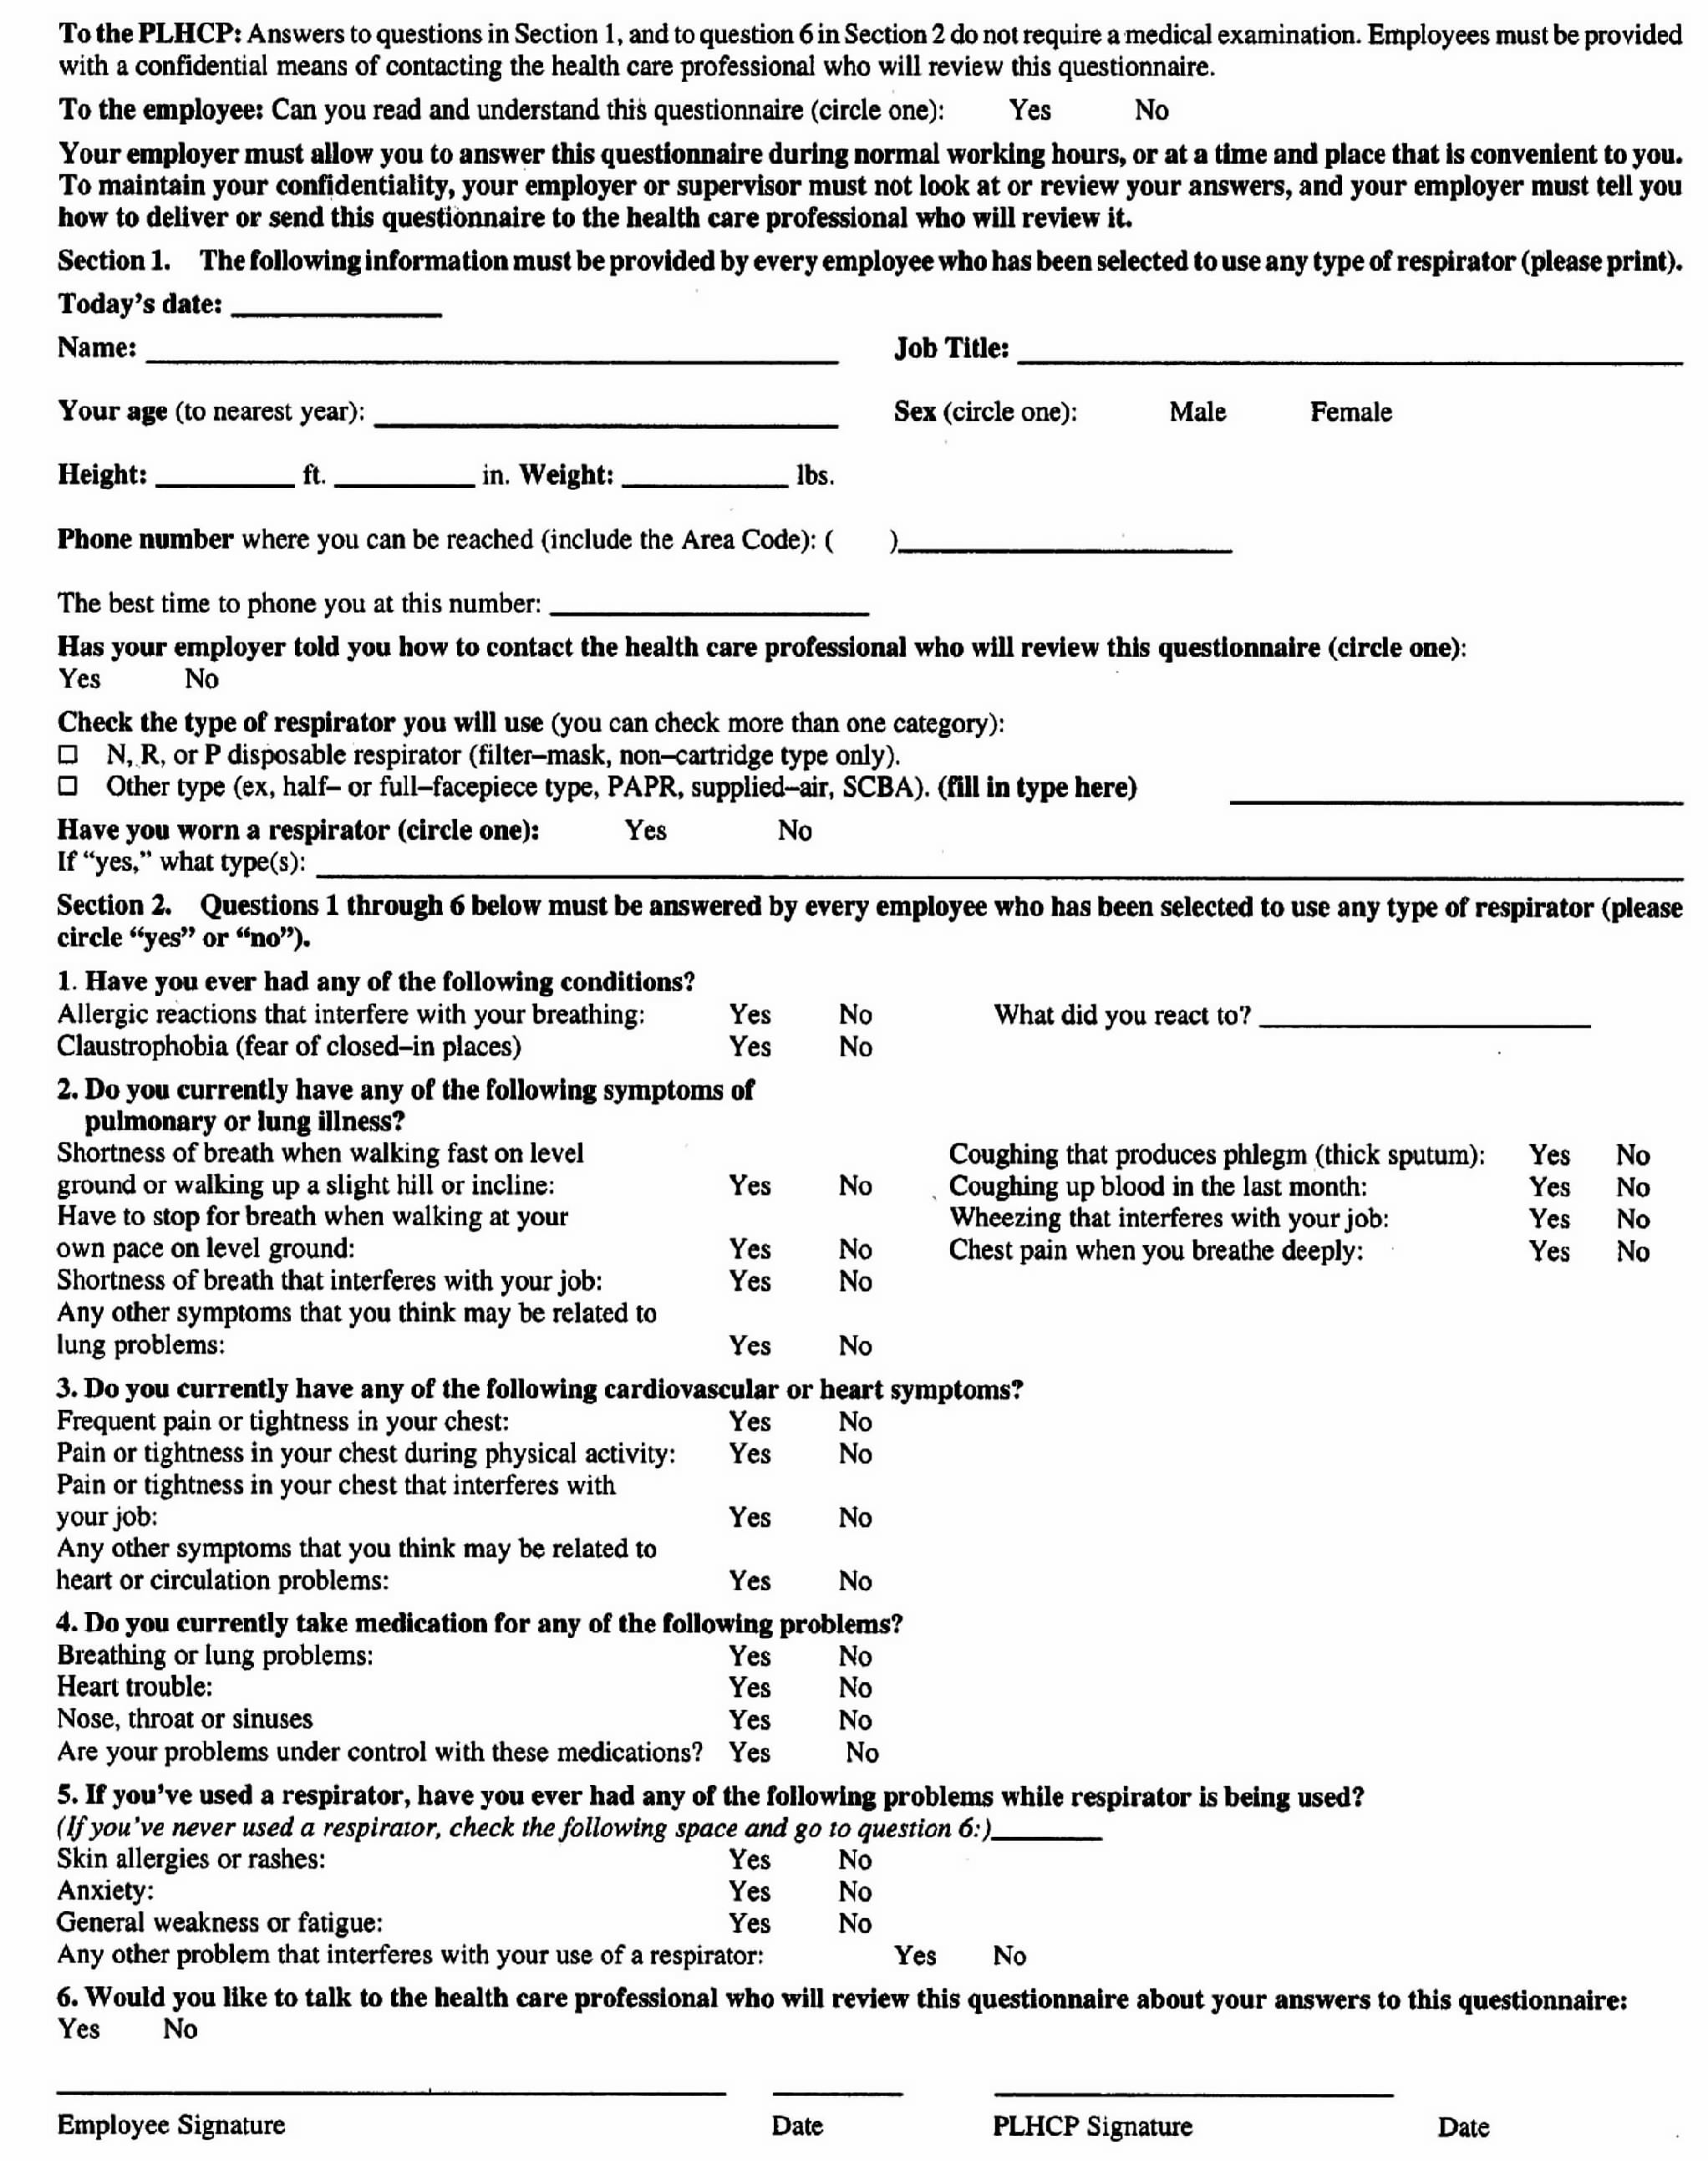 Image 1 within Appendix B - Alternate Respirator Medical Evaluation Questionnaire (This Appendix is Mandatory if the Employer chooses to use a Respirator Medical Evaluation Questionnaire other than the Questionnaire in Section 5144 Appendix C)